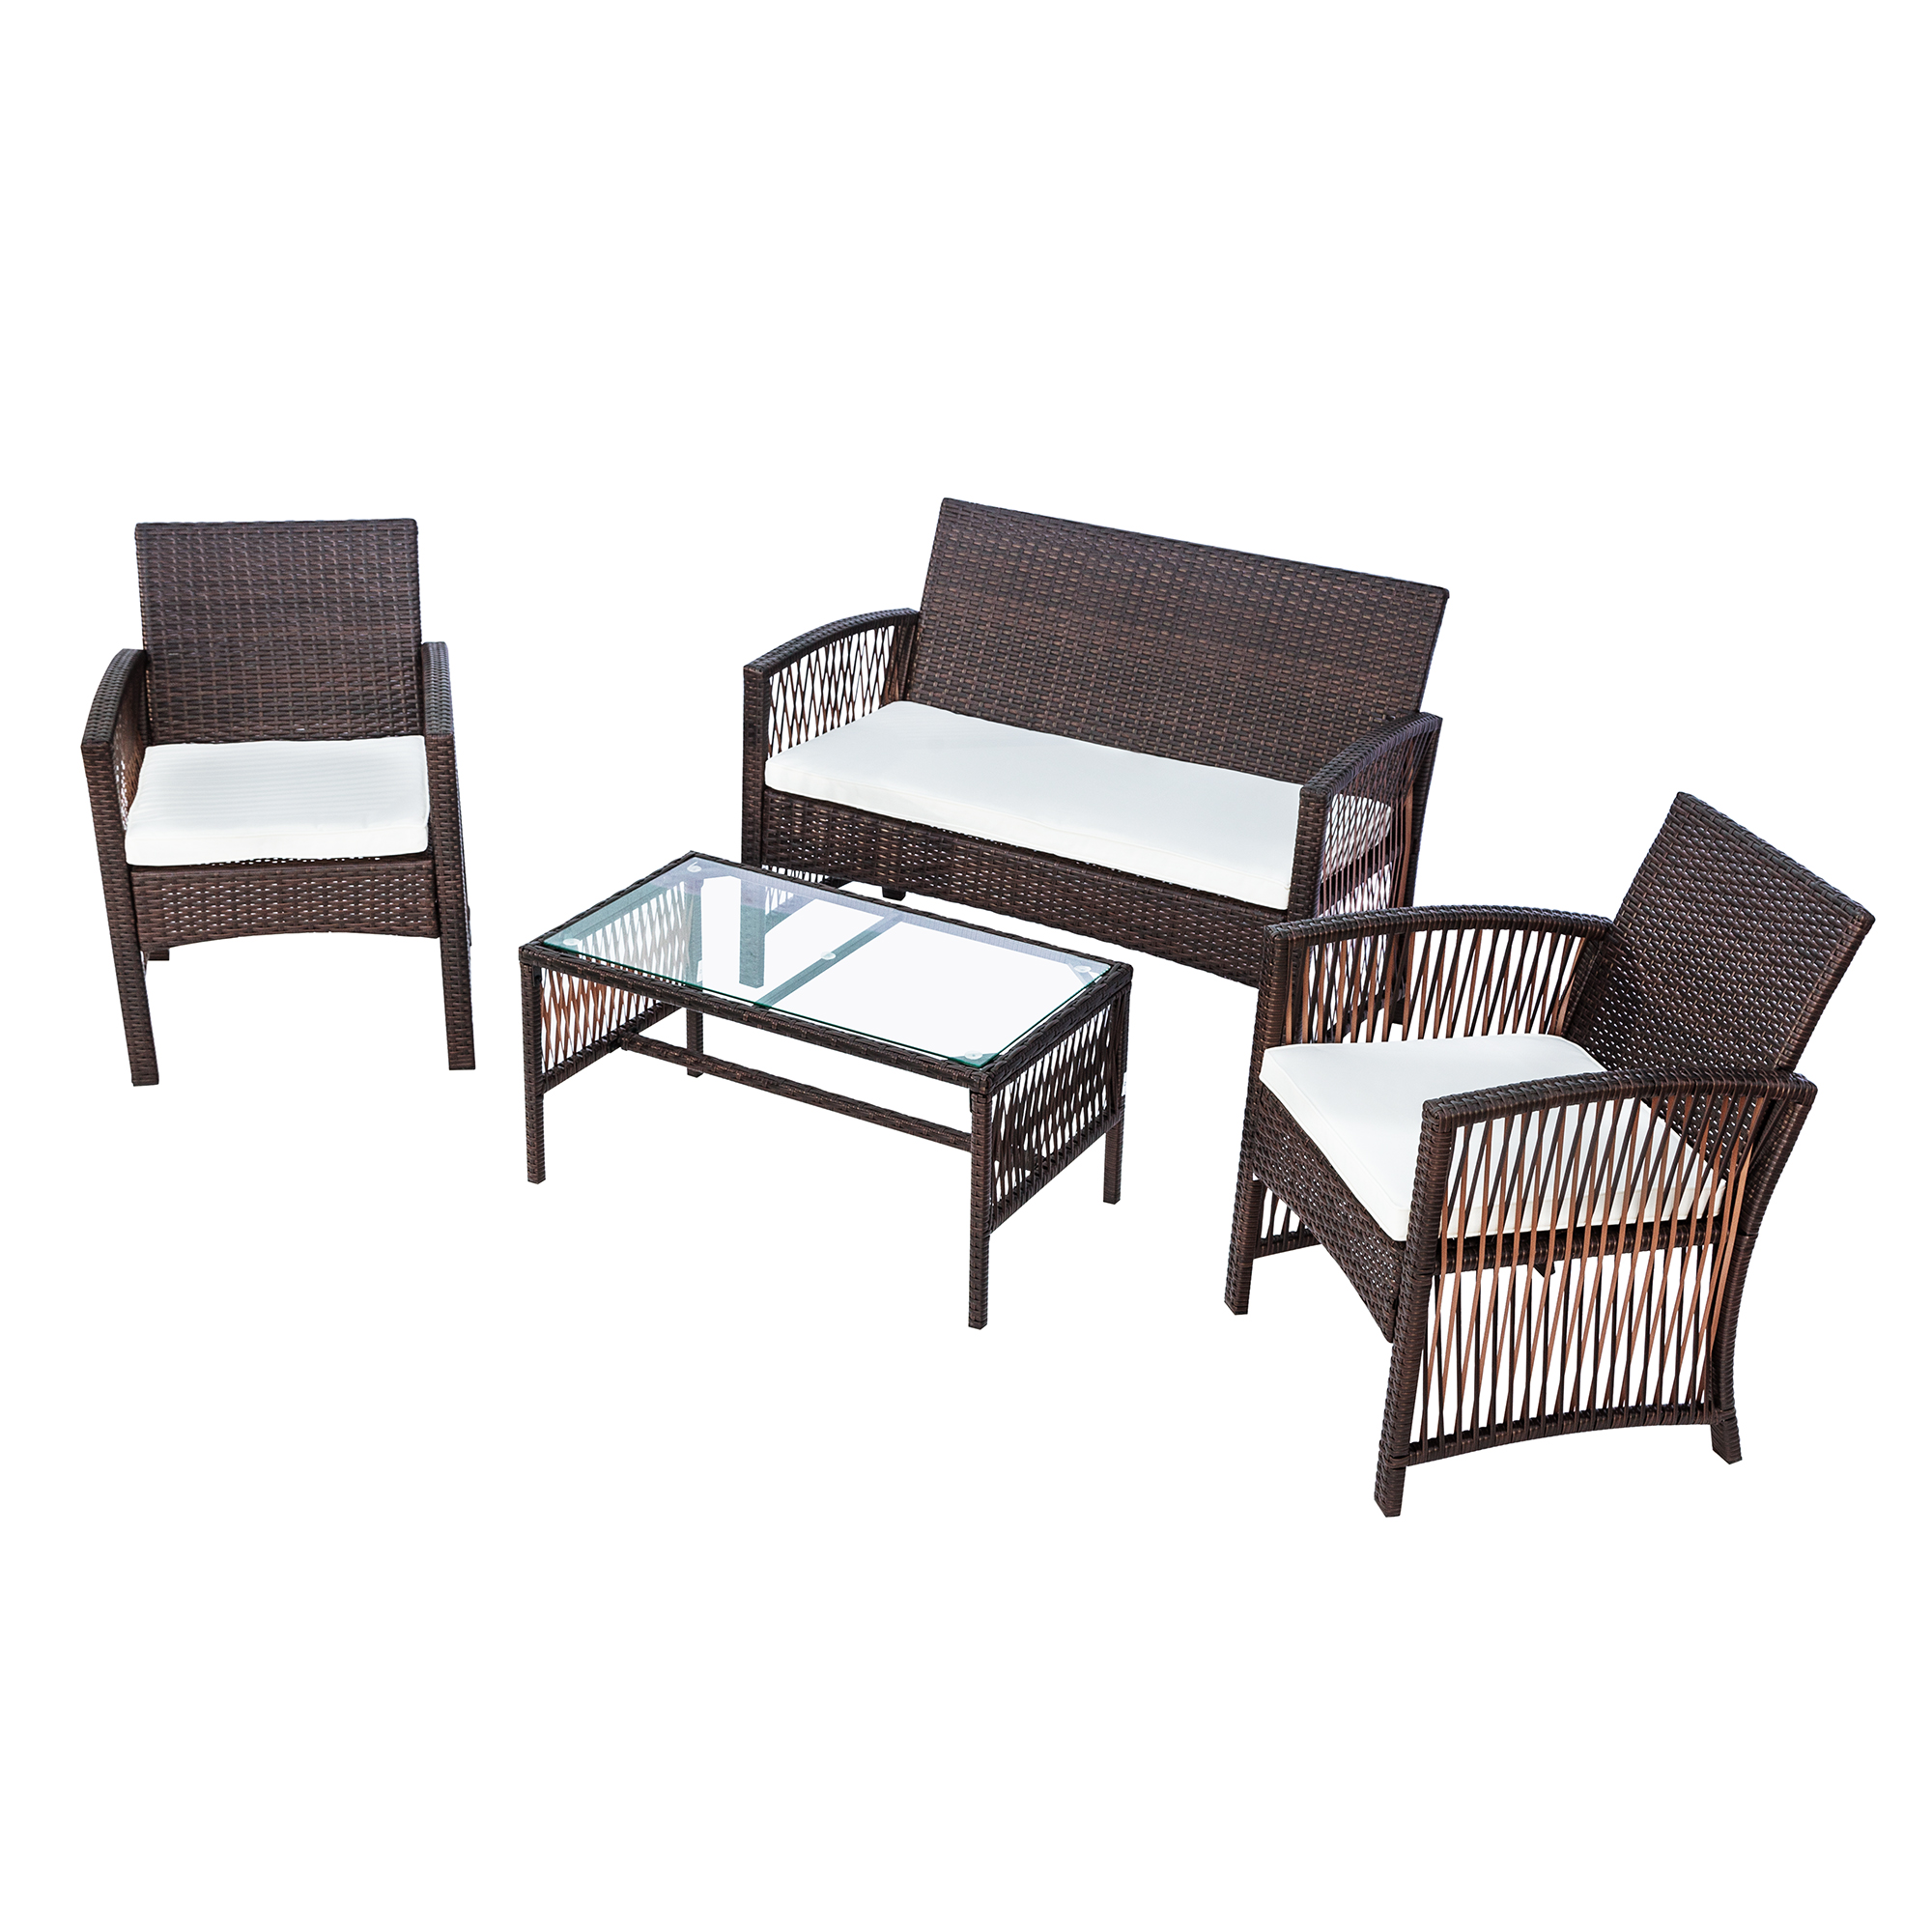 Patio Outdoor Furniture Sets, UHOMEPRO 4 Pieces PE Rattan Garden Furniture Wicker Chairs Set with Coffee Table, Outdoor Conversation Sets, Patio Dining Set for Backyard Poolside Porch, Brown, W7763 - image 4 of 11